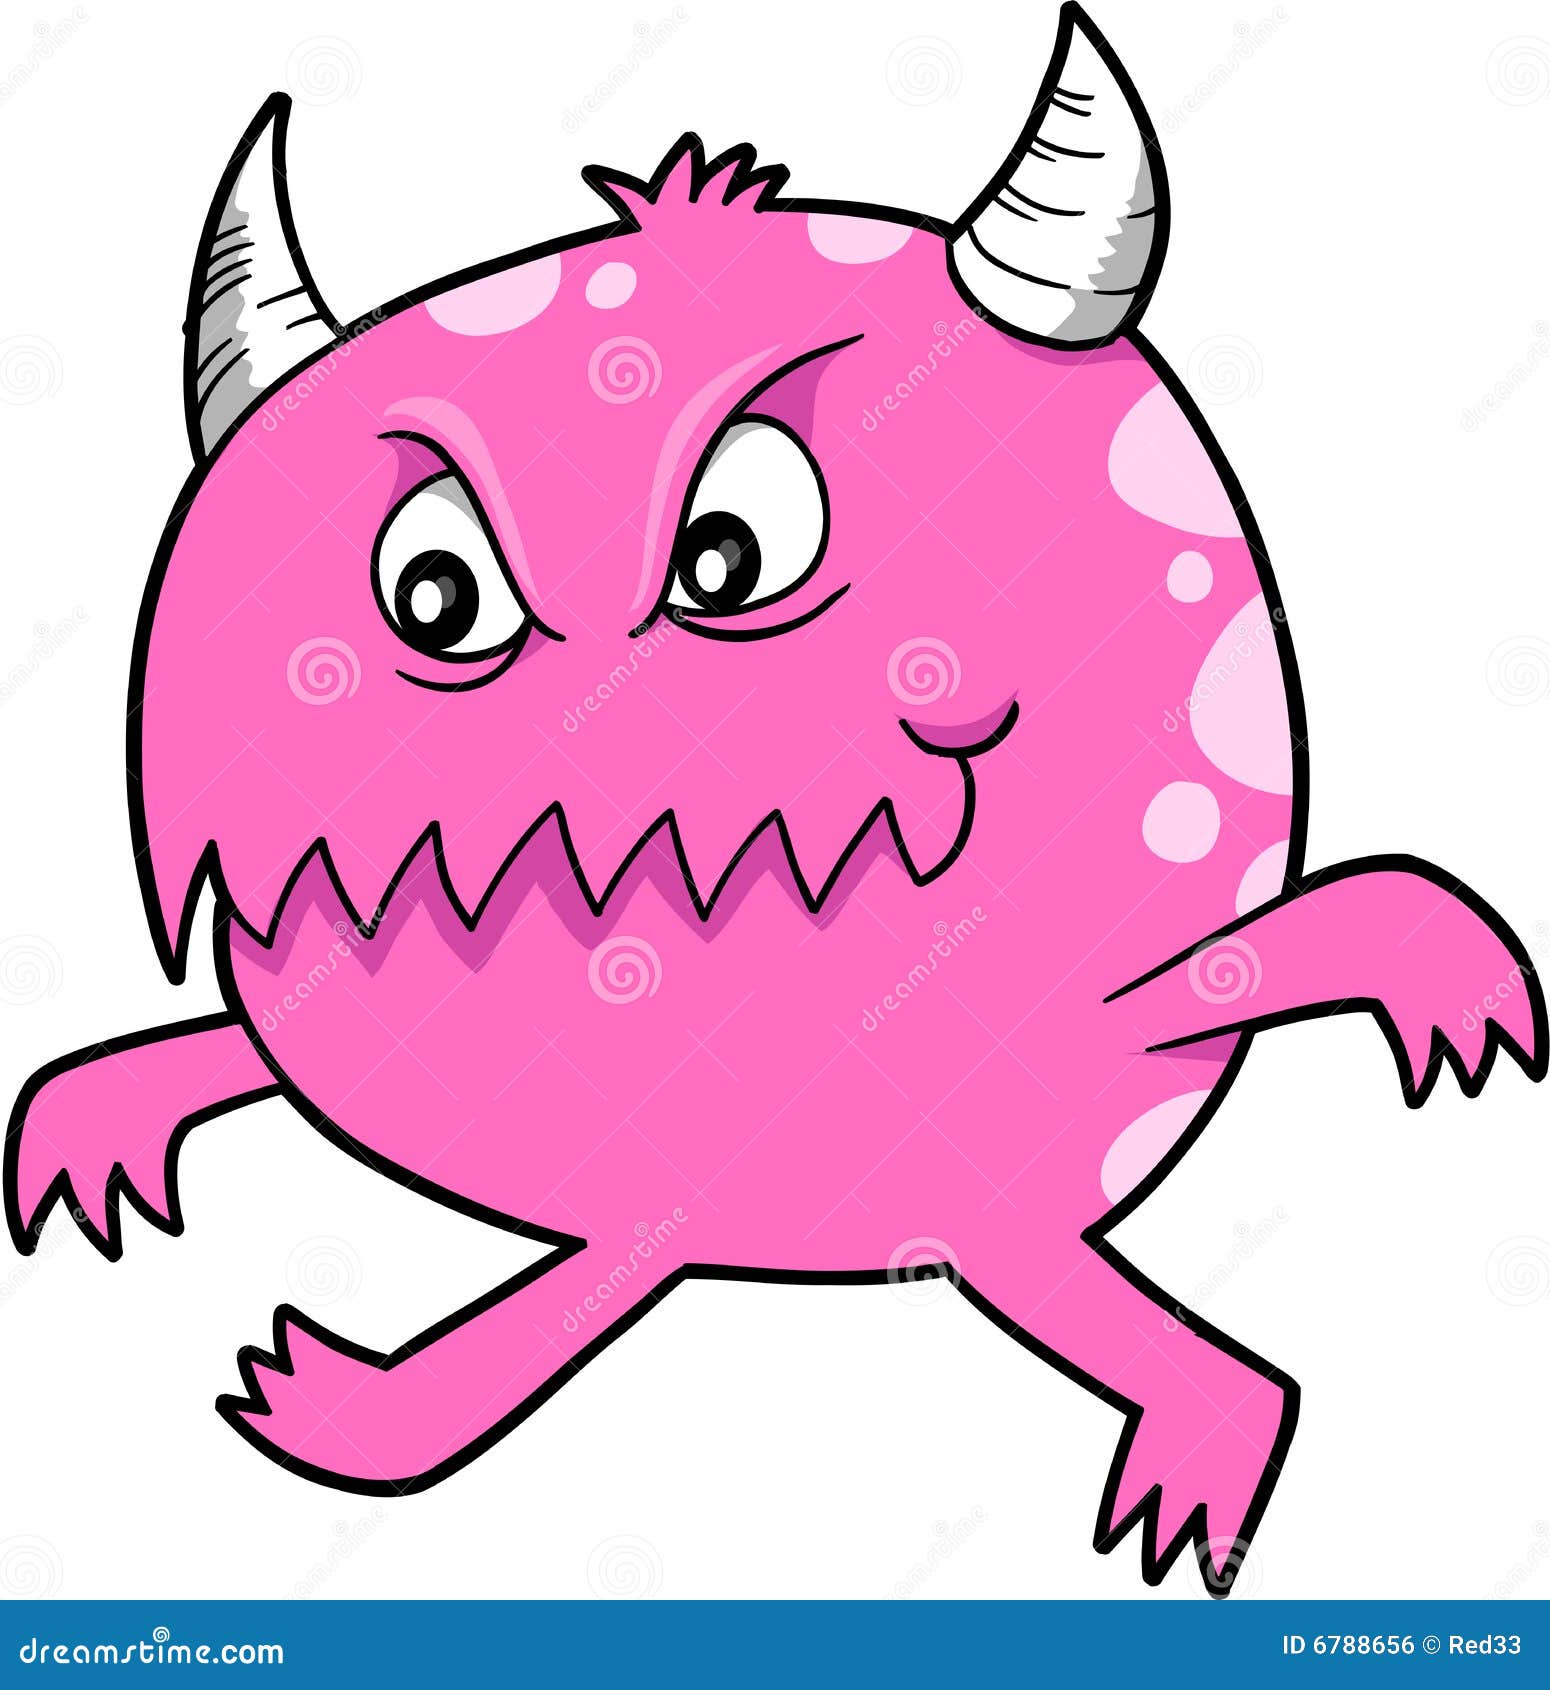 free vector monster clipart - photo #32